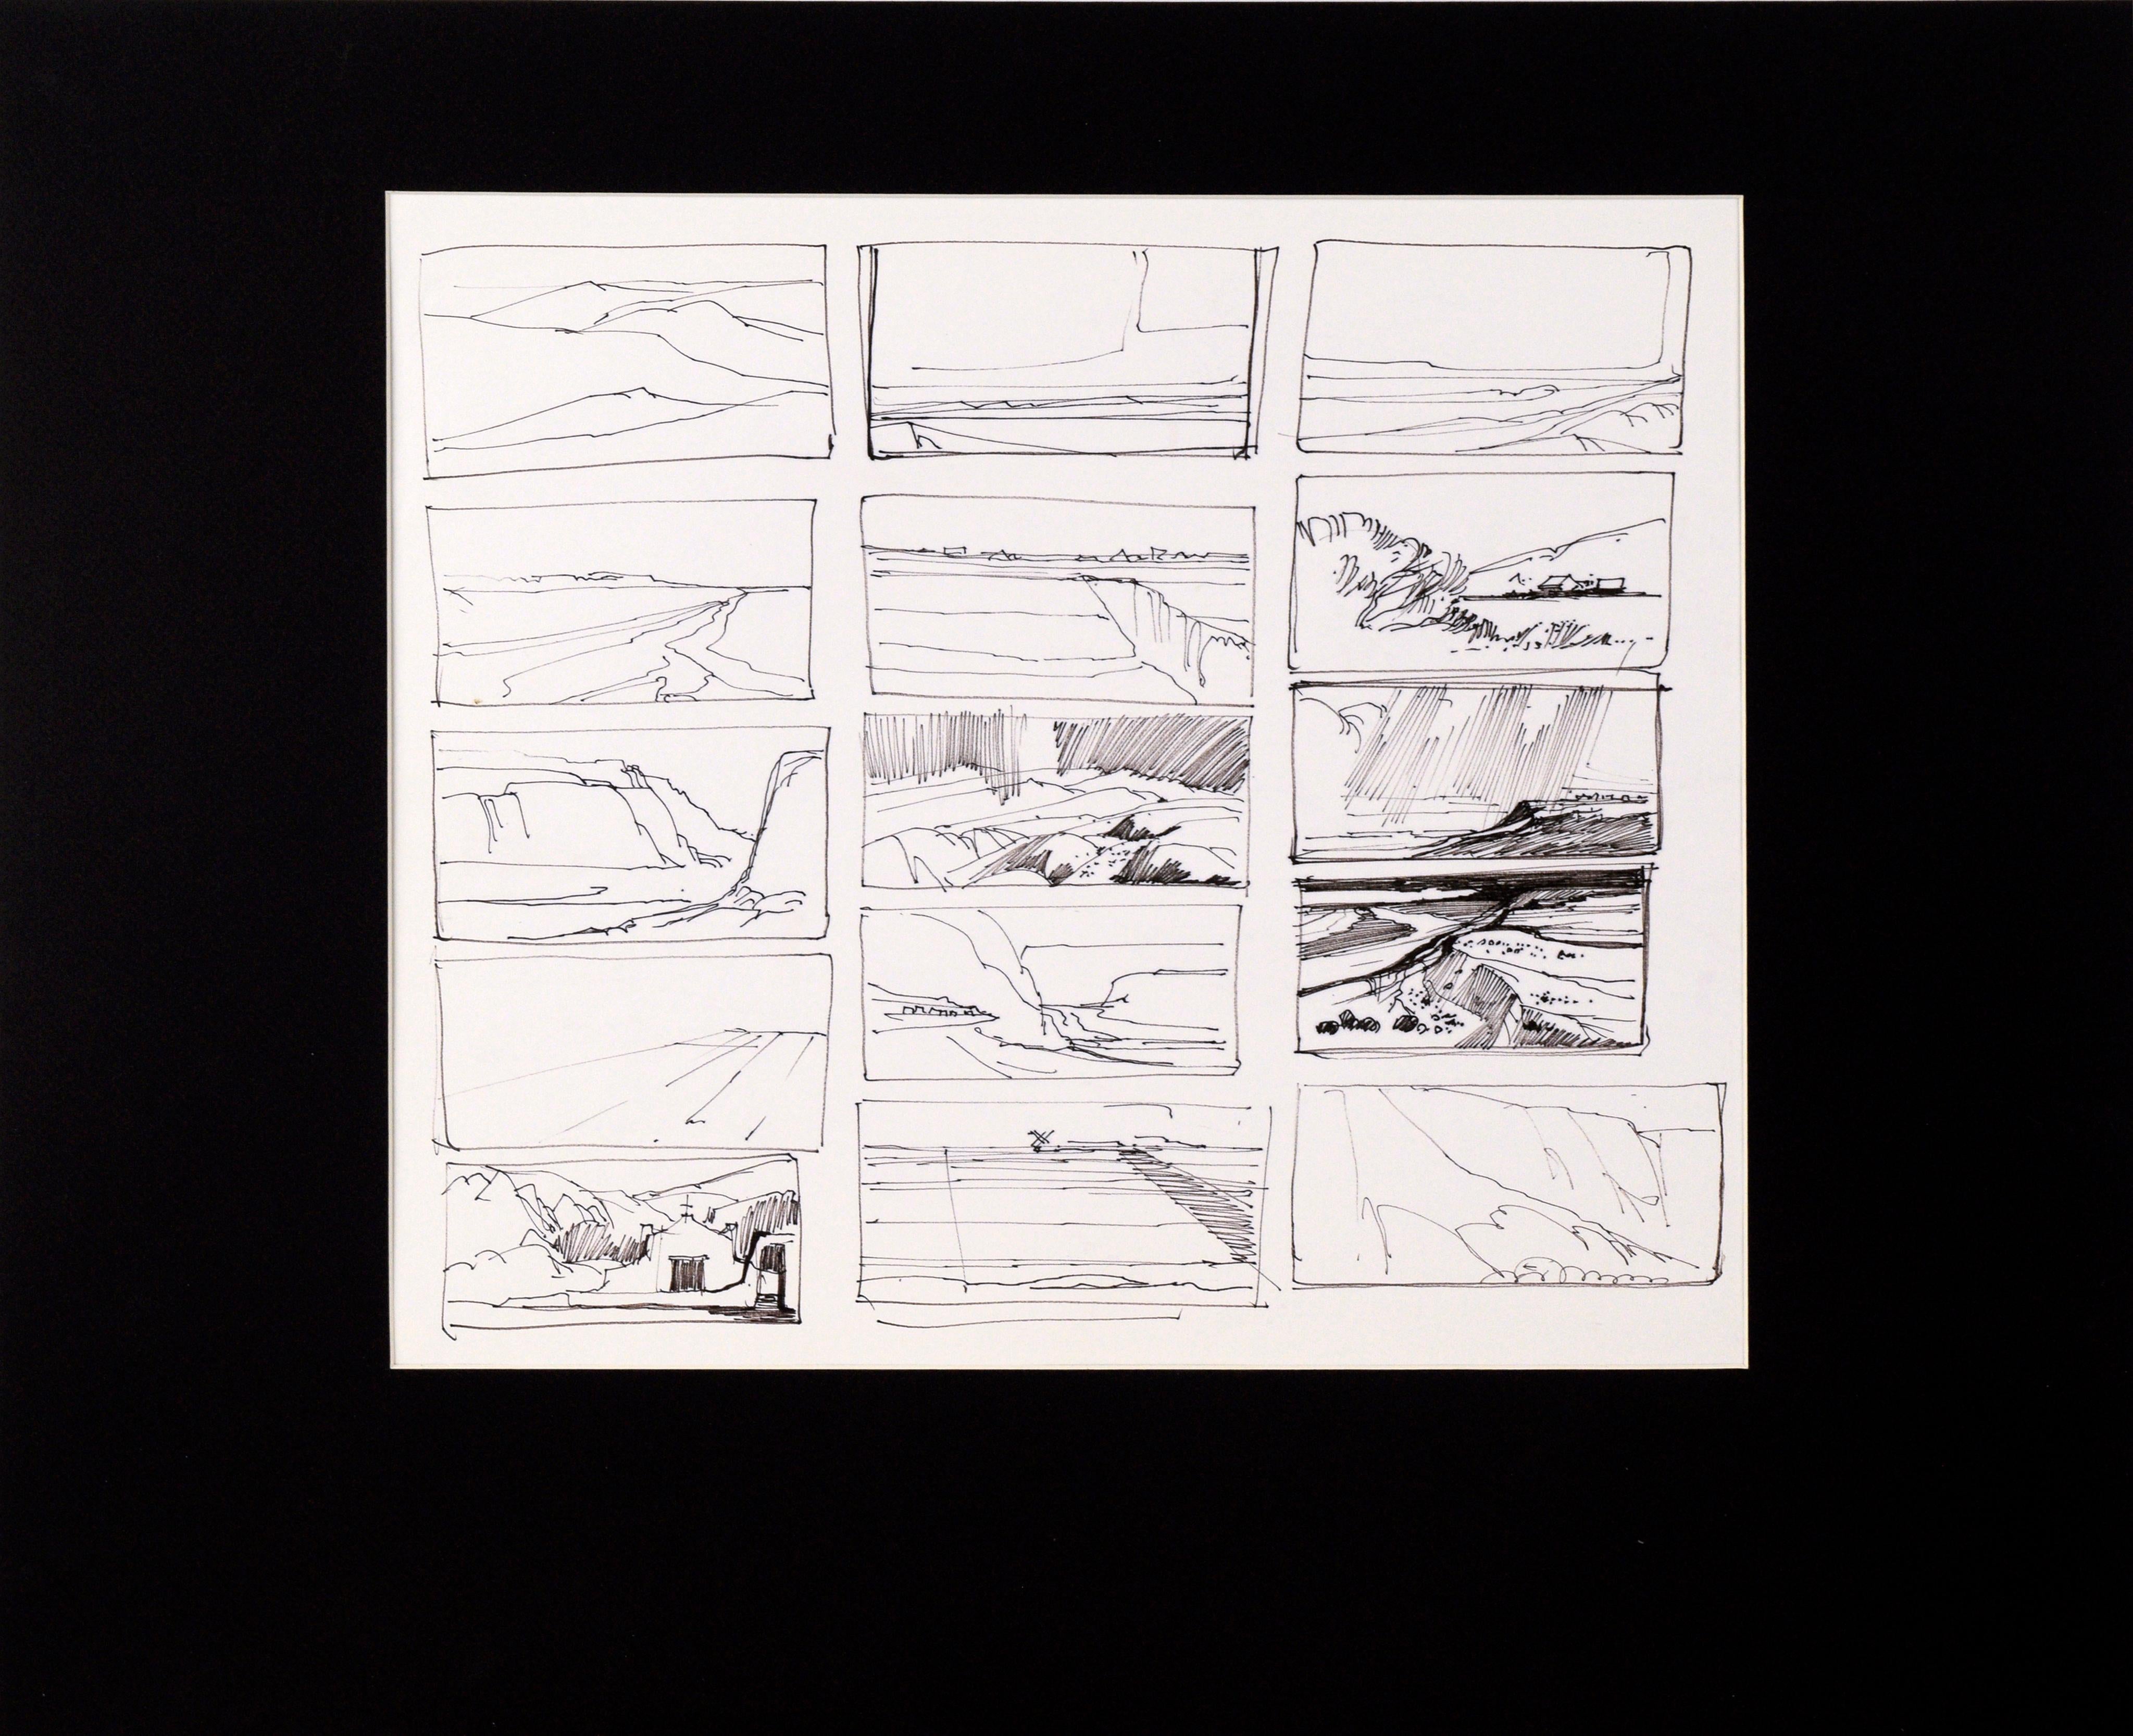 Laurence Sisson Landscape Art - Fifteen-Panel Thumbnail Sketches of Desert and Canyon Landscapes in Ink on Paper